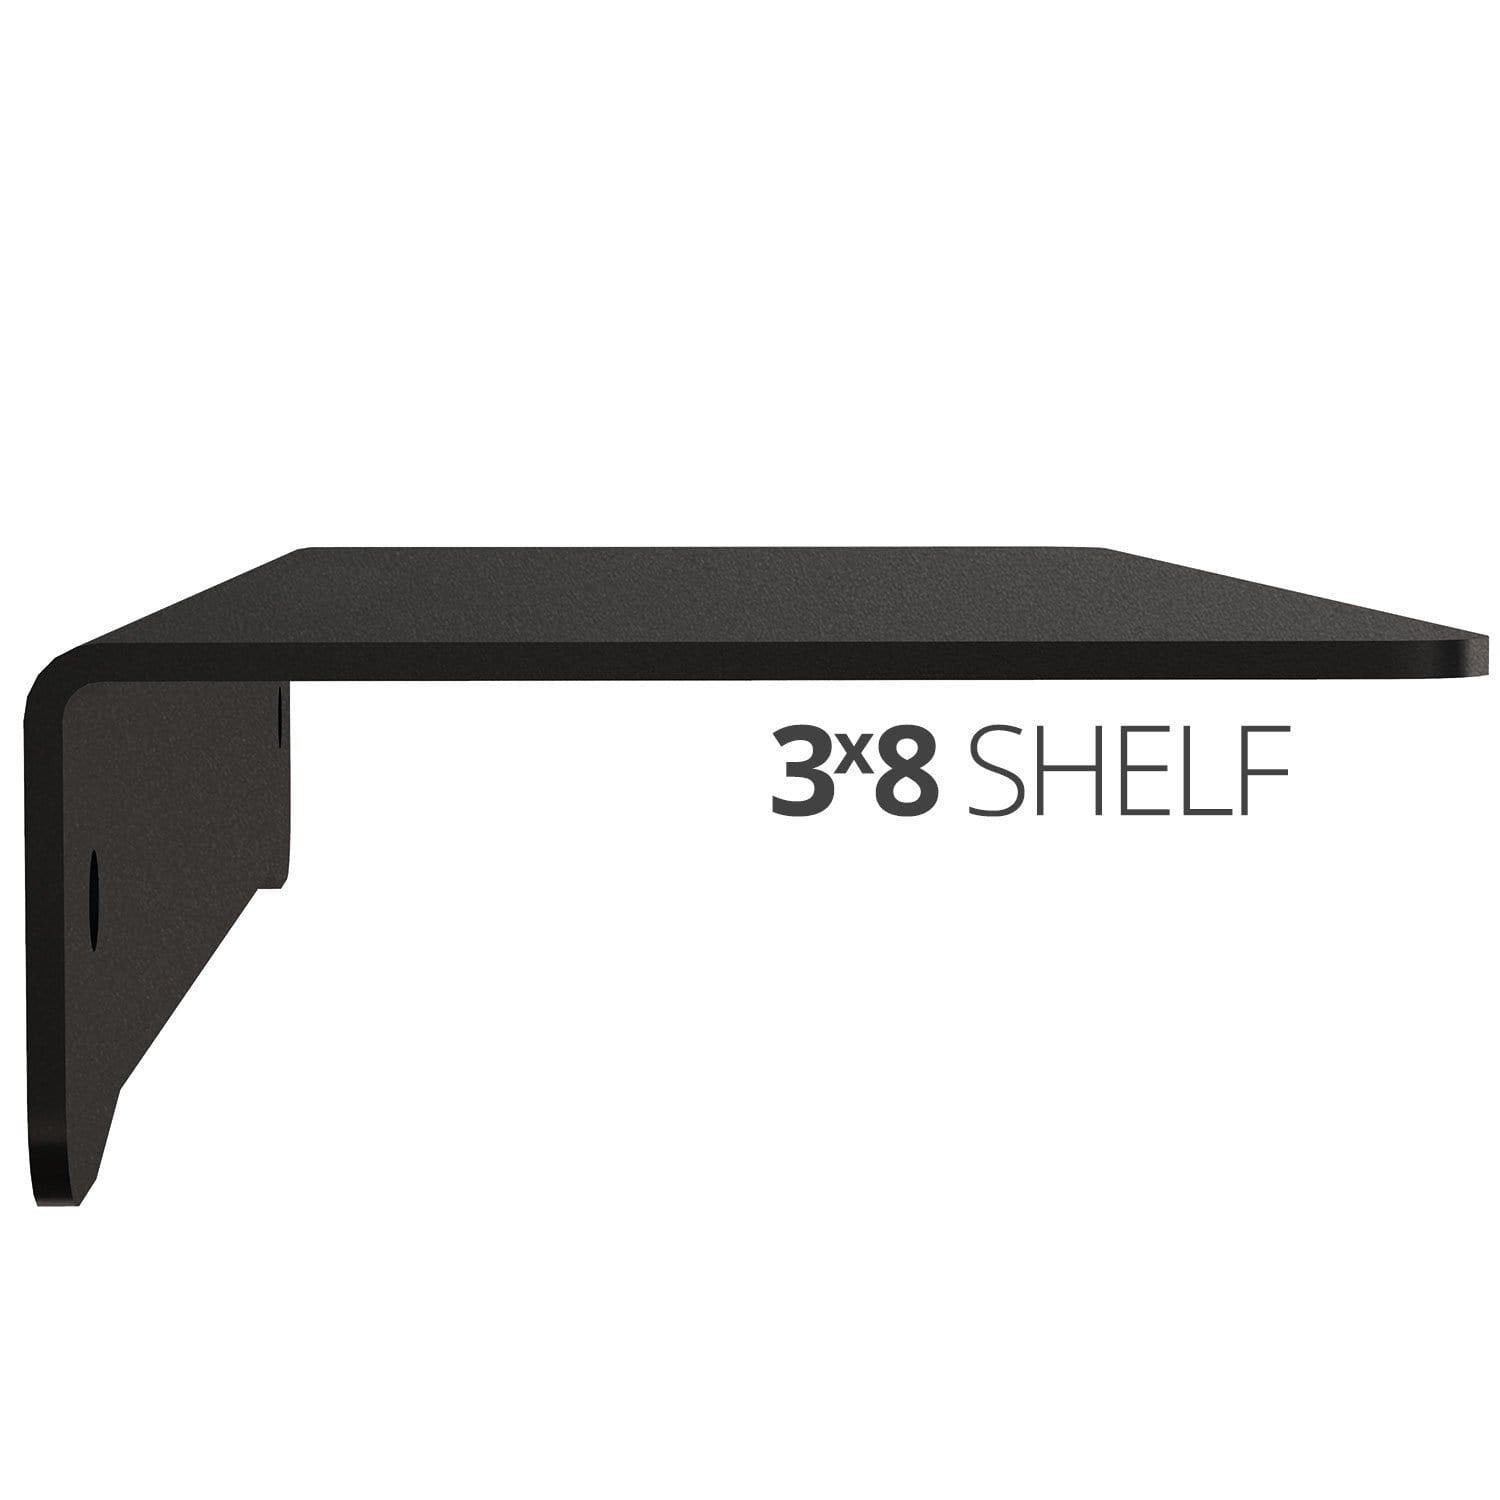 Small wall mounted shelf for home, office and garage - 3x8 side